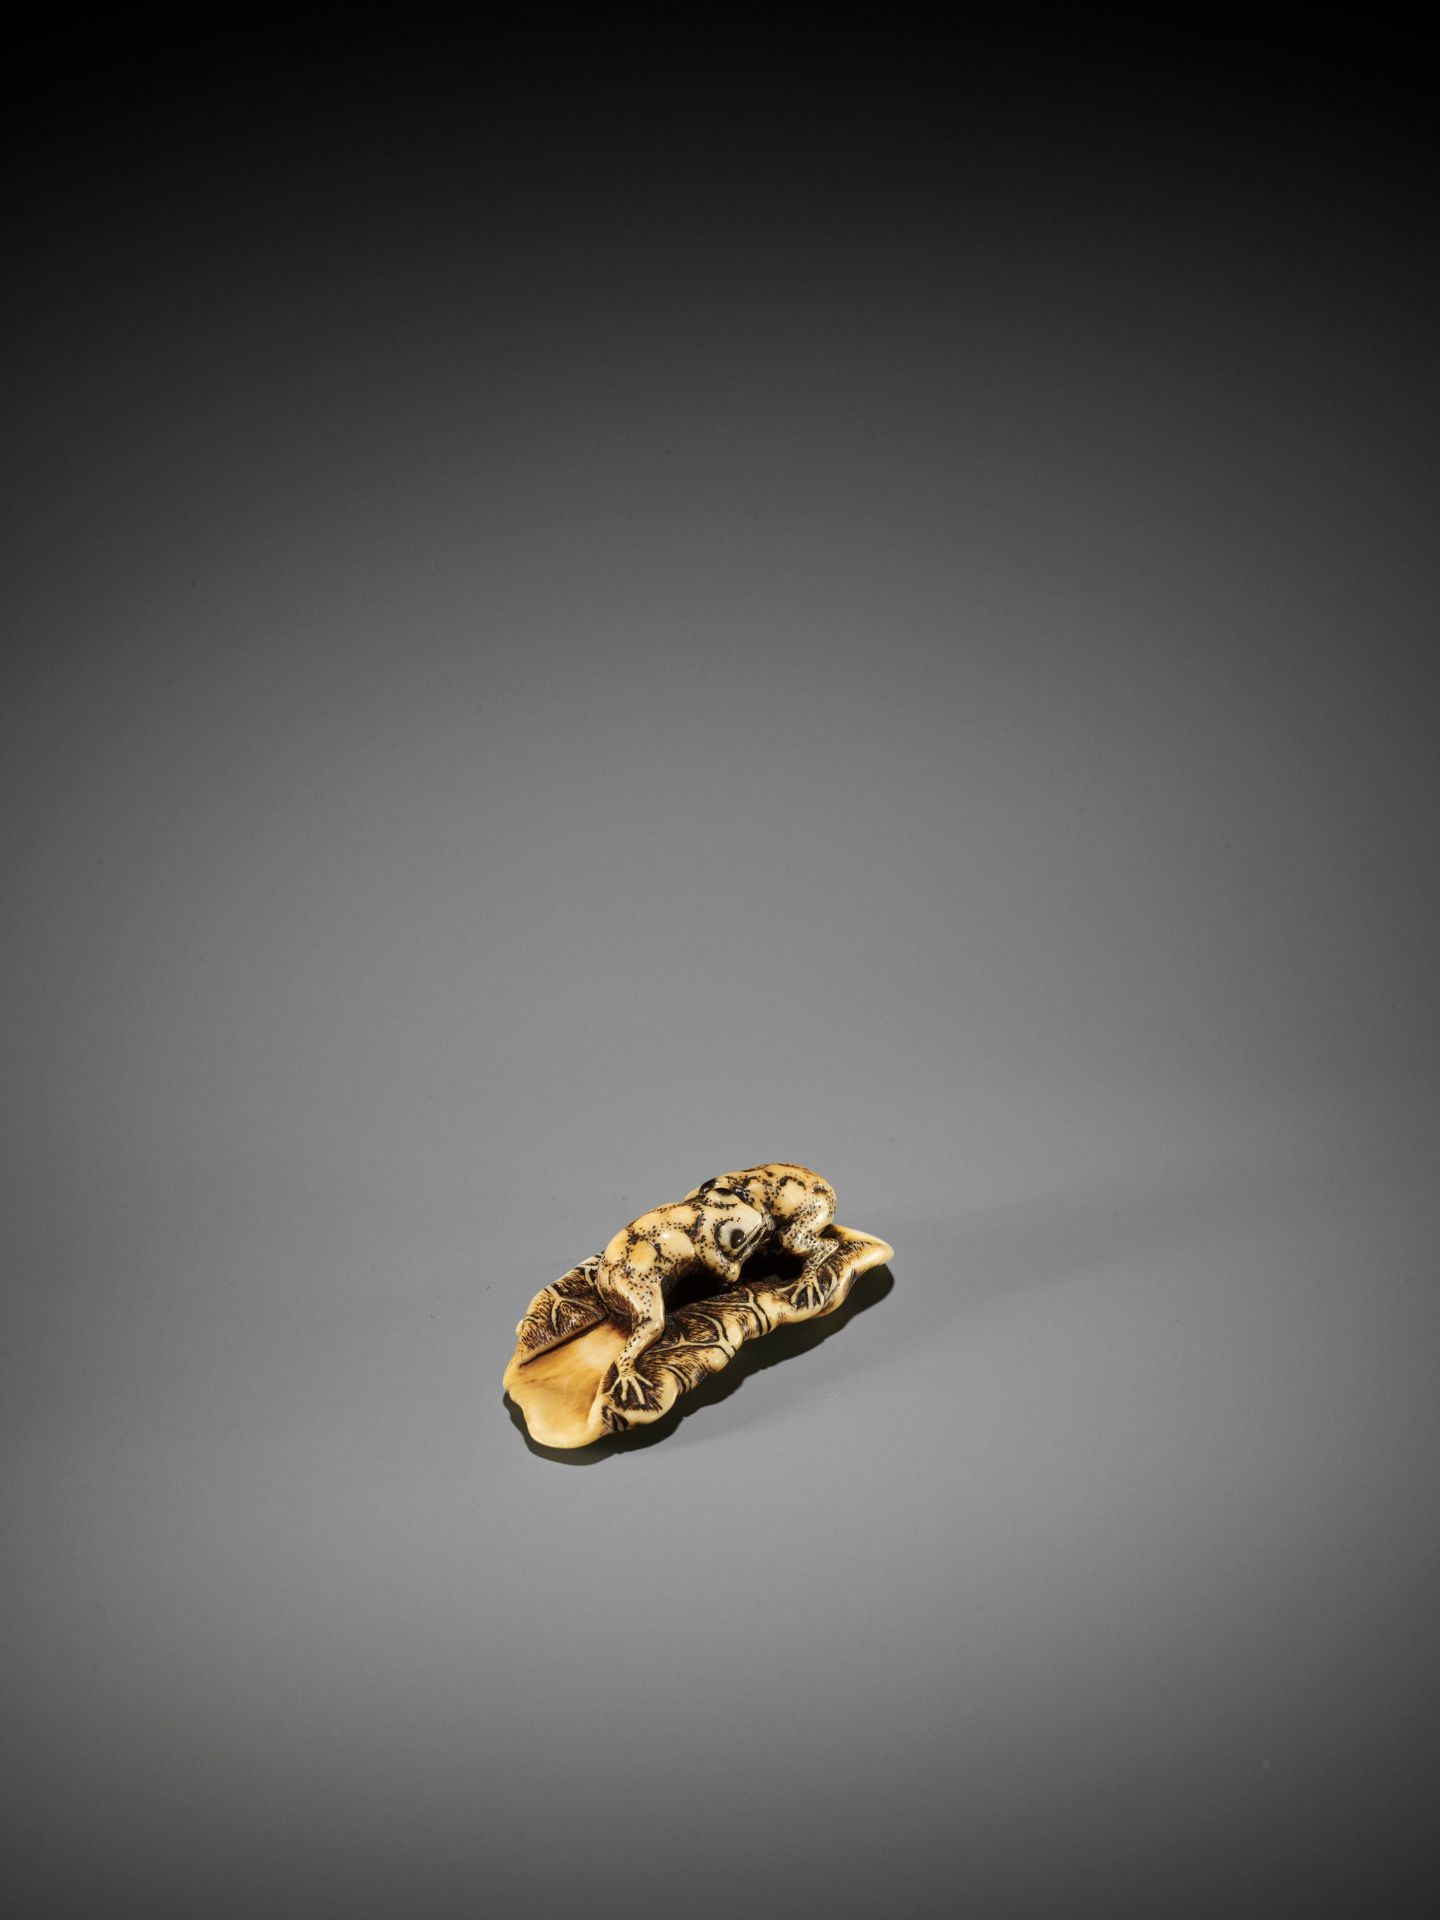 YOSHITOMO: AN IVORY NETSUKE OF TWO FROGS WRESTLING ON A LOTUS LEAF - Image 8 of 11